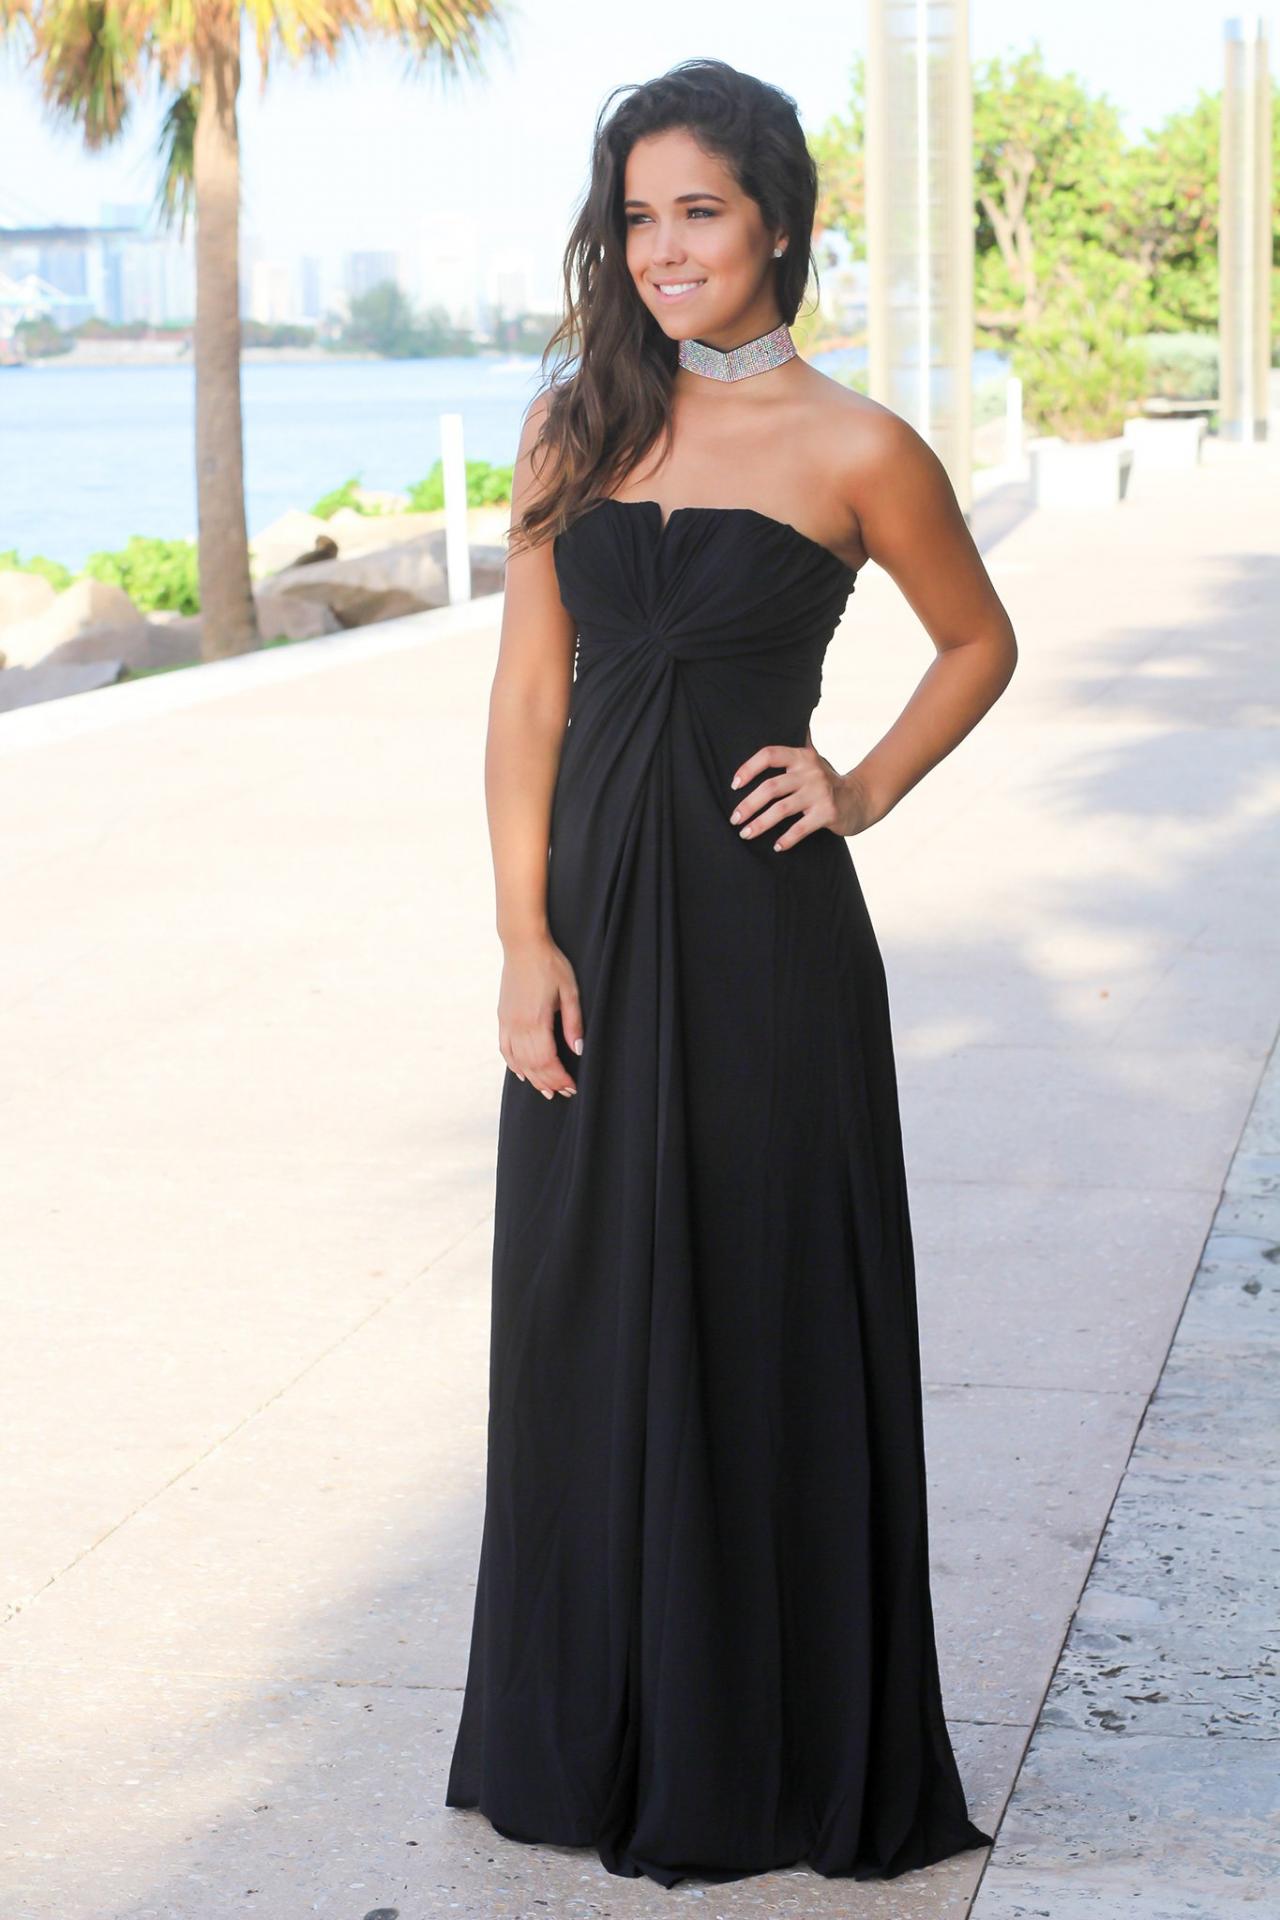 Black Ruched Strapless Straight Across Floor Length A-line Formal Dress, Prom Dress, Bridesmaid Dress